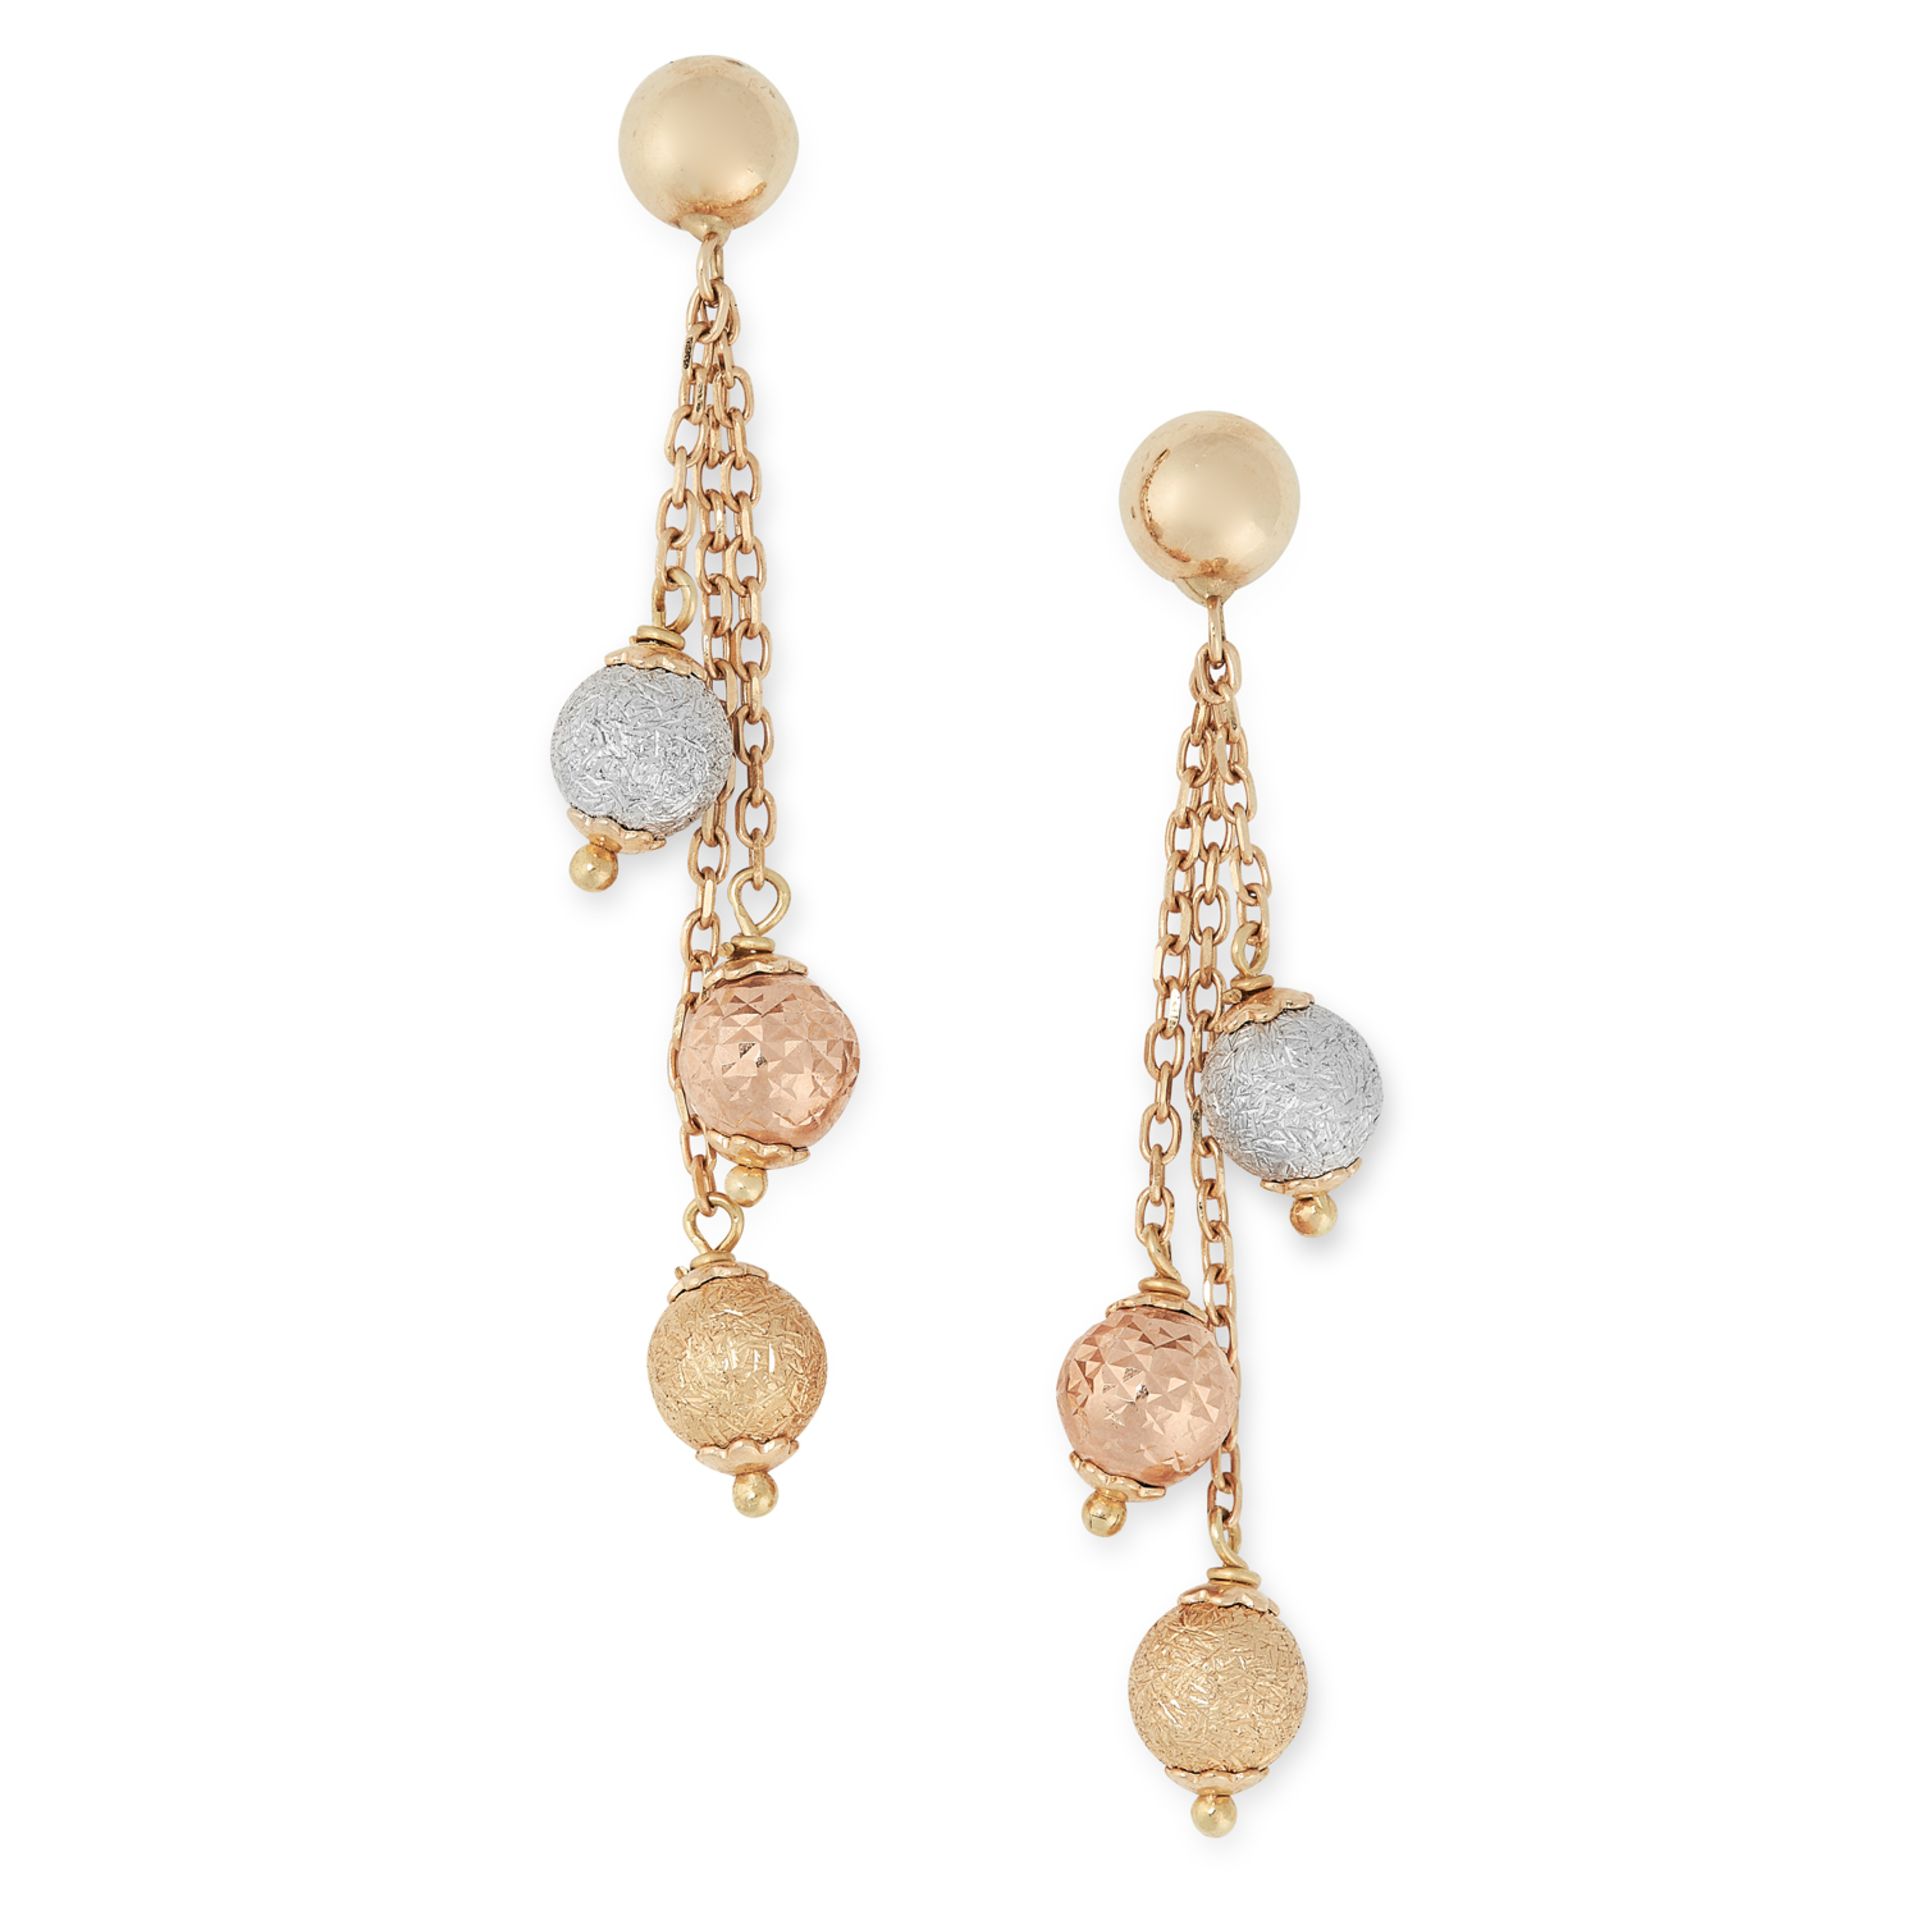 A PAIR OF TRICOLOUR GOLD DROP EARRINGS in white, yellow and rose gold, each set with a white, yellow